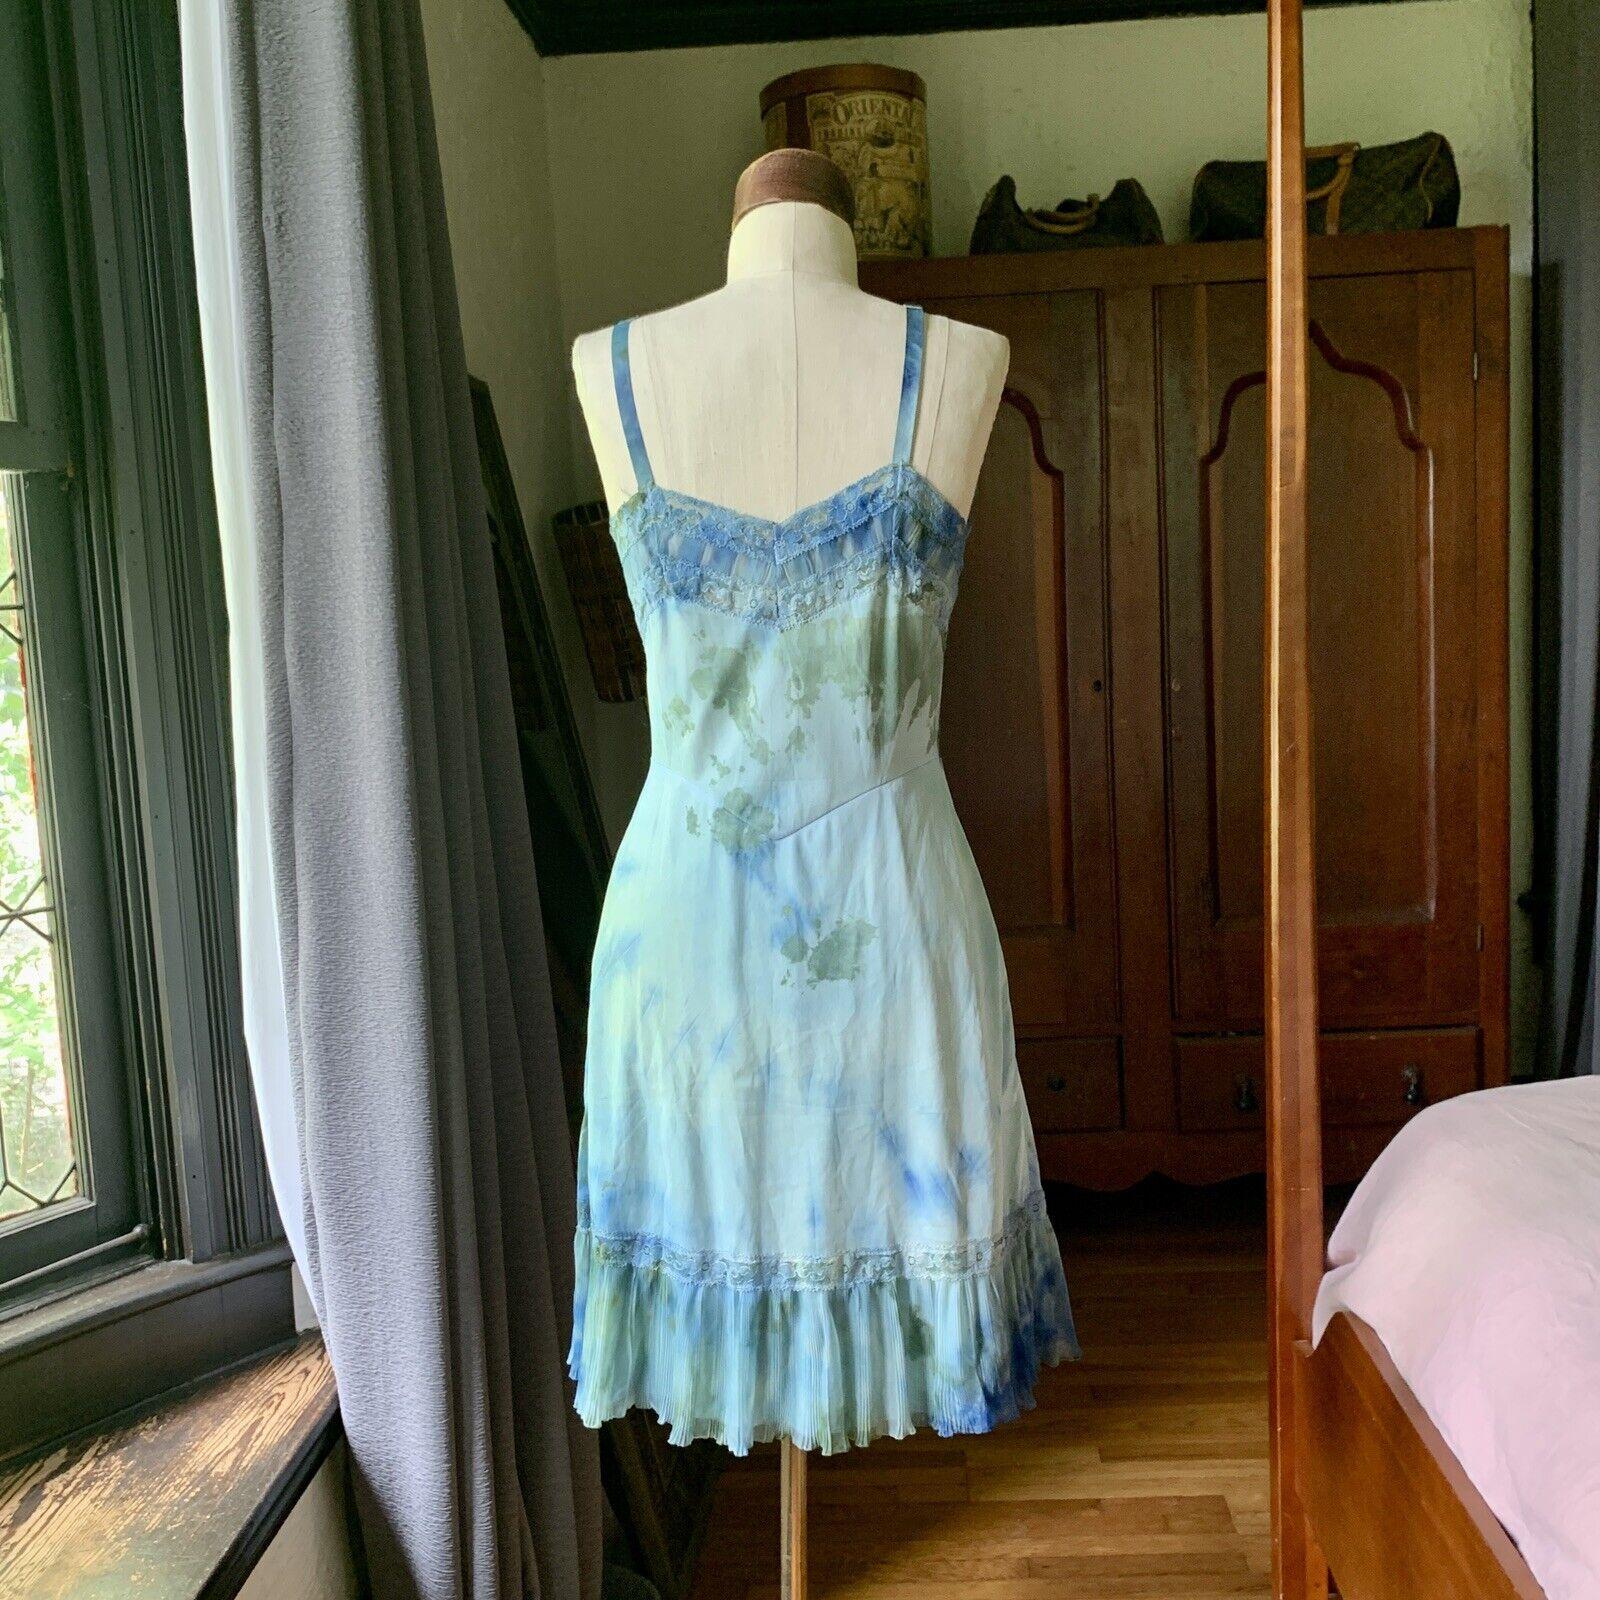 DYED PETALS Vintage Hand Botanically Dyed Tie-Dyed Slip Dress S/M 34 For Sale 1